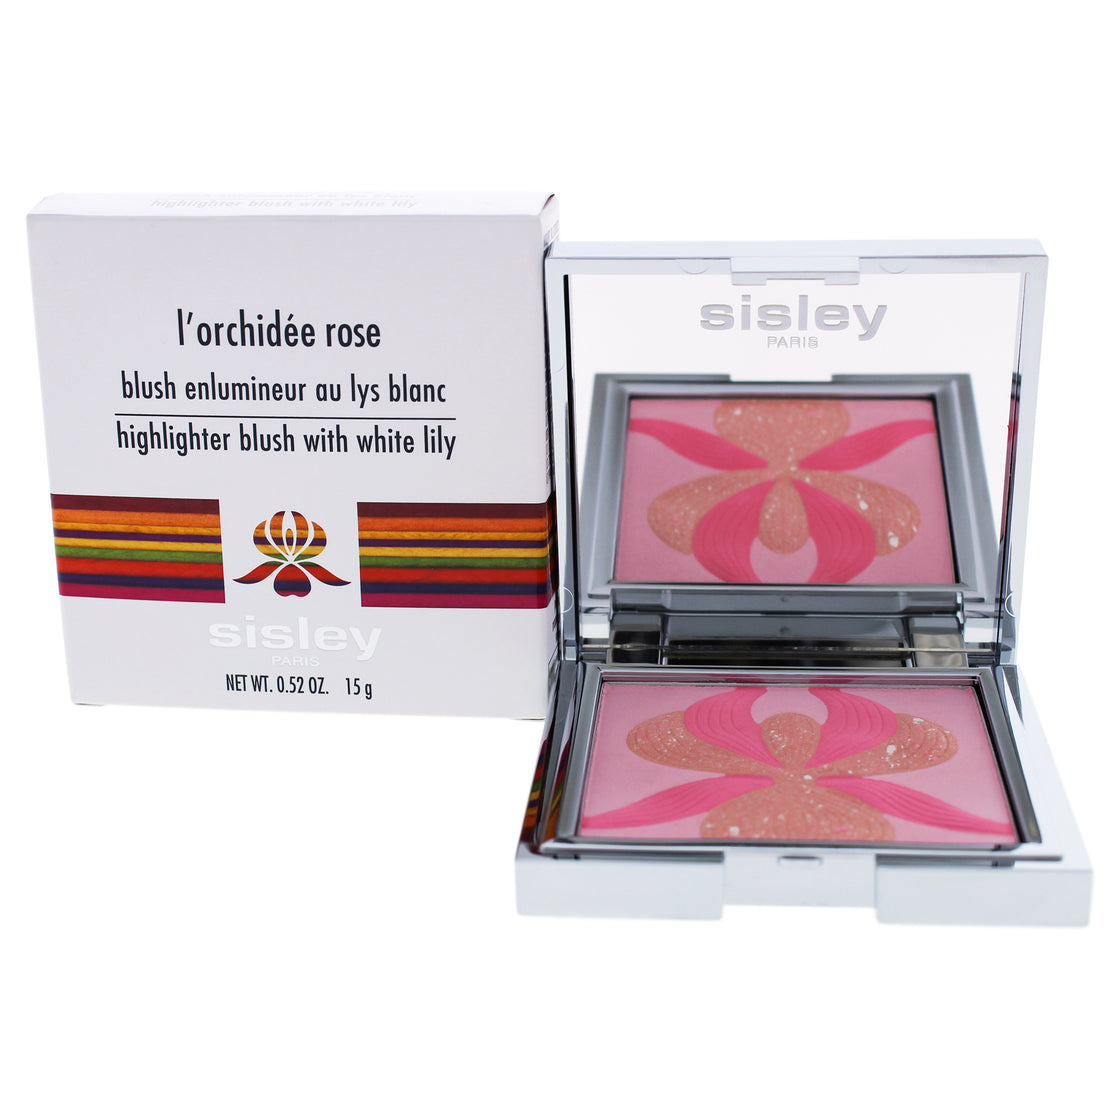 LOrchidee Highlighter Blush With White Lily - 2 Rose by Sisley for Women - 0.52 oz Makeup